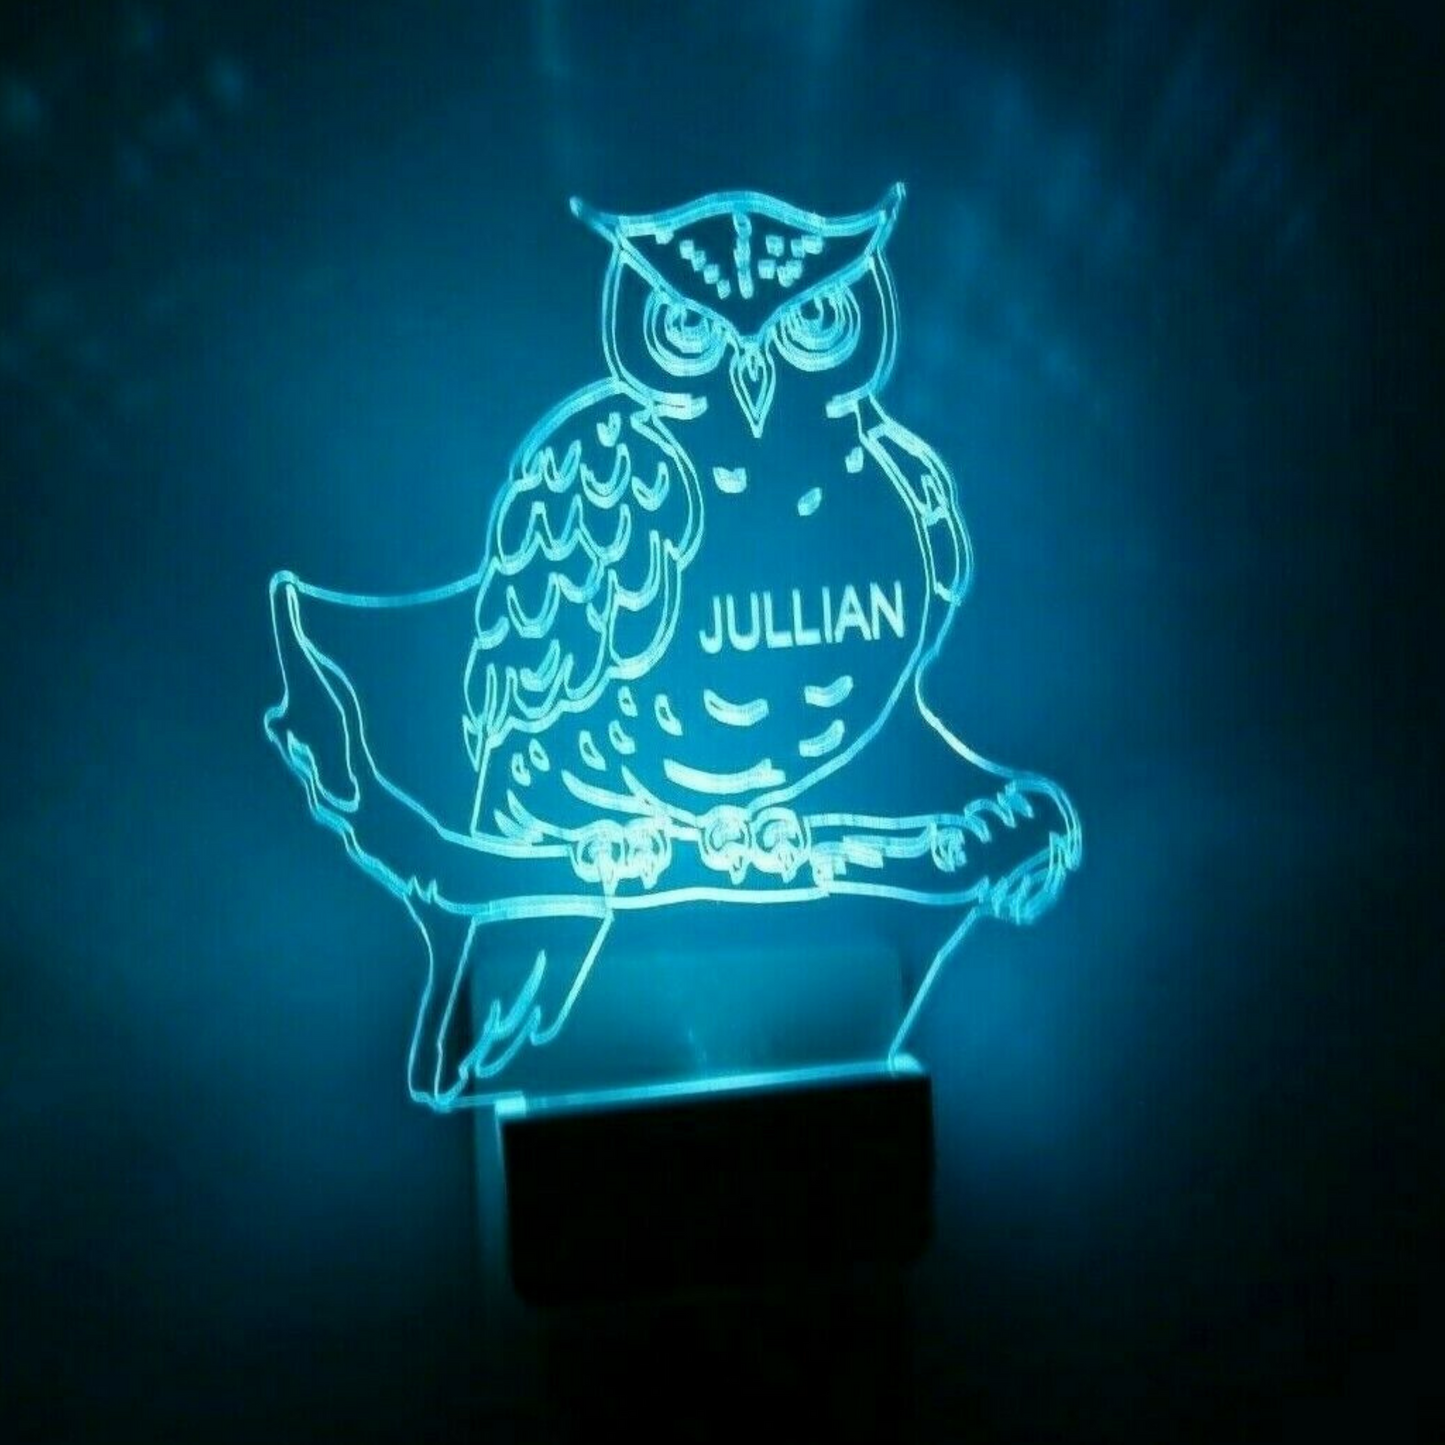 Owl Night Light Multi Color Personalized LED Wall Plug-in, Cool-Touch Smart Dusk to Dawn Sensor, Kids Children's Bedroom Hallway